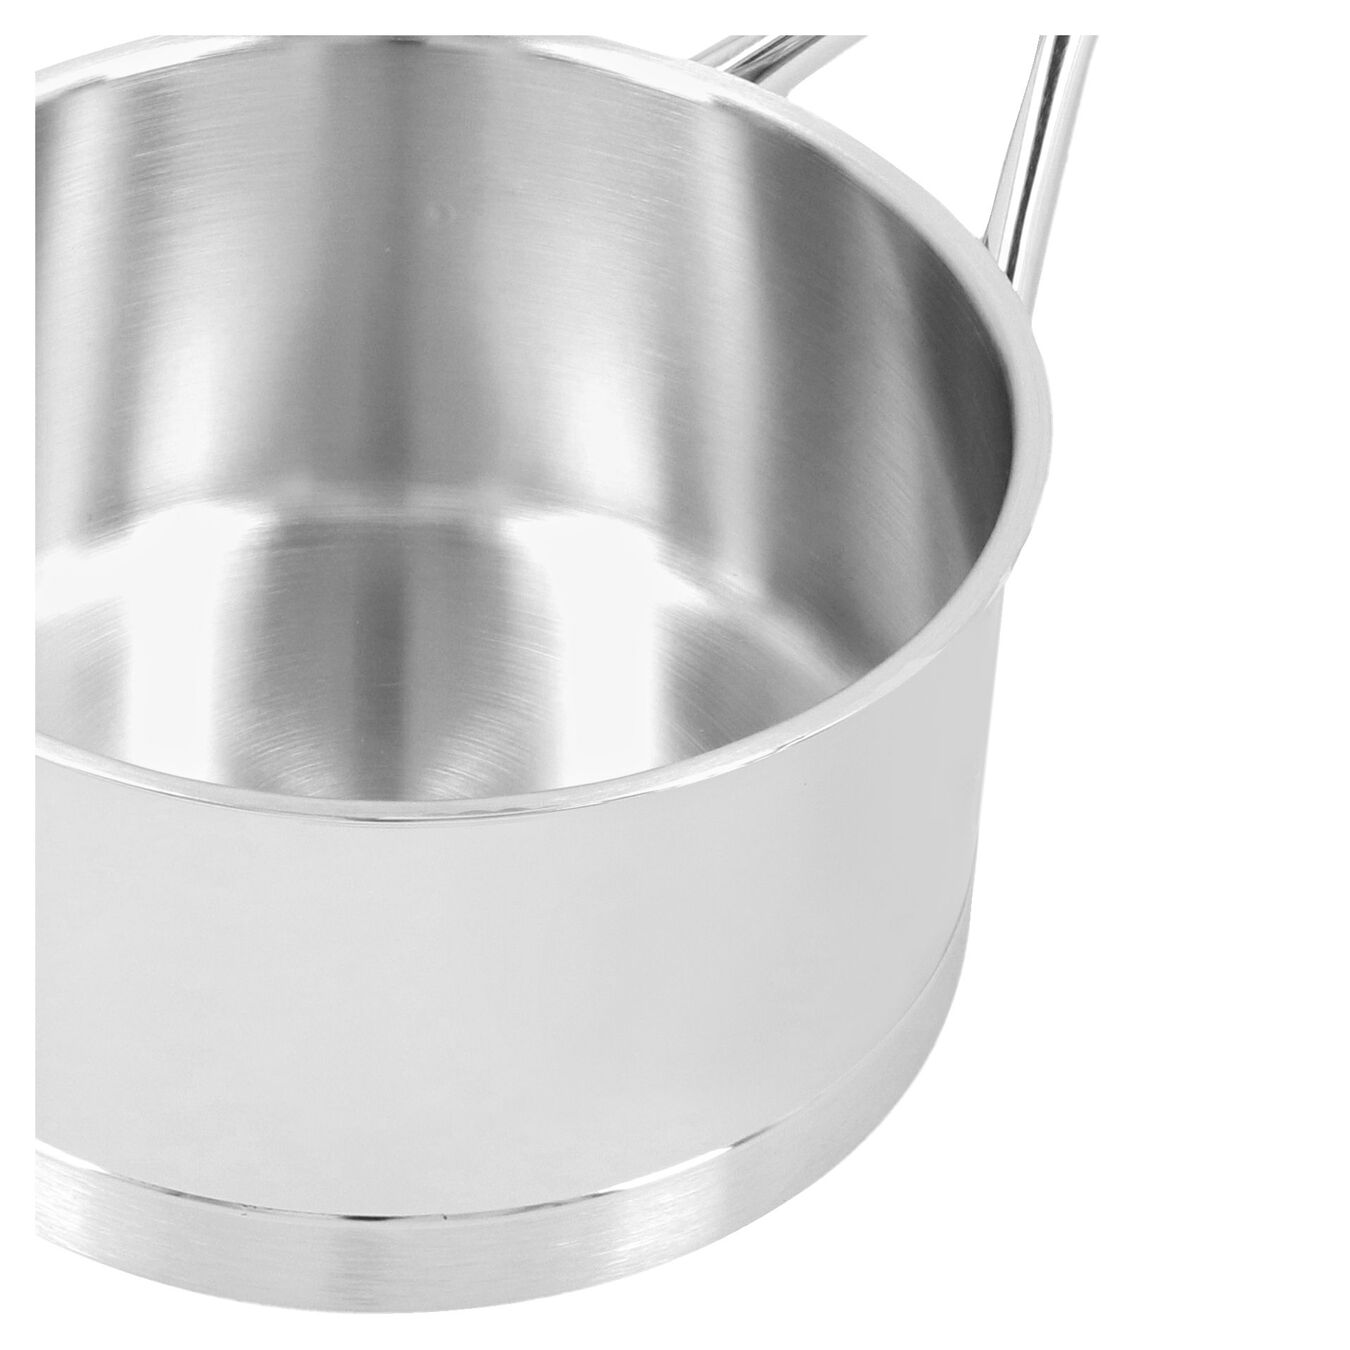 14 cm 18/10 Stainless Steel Saucepan with lid silver,,large 5